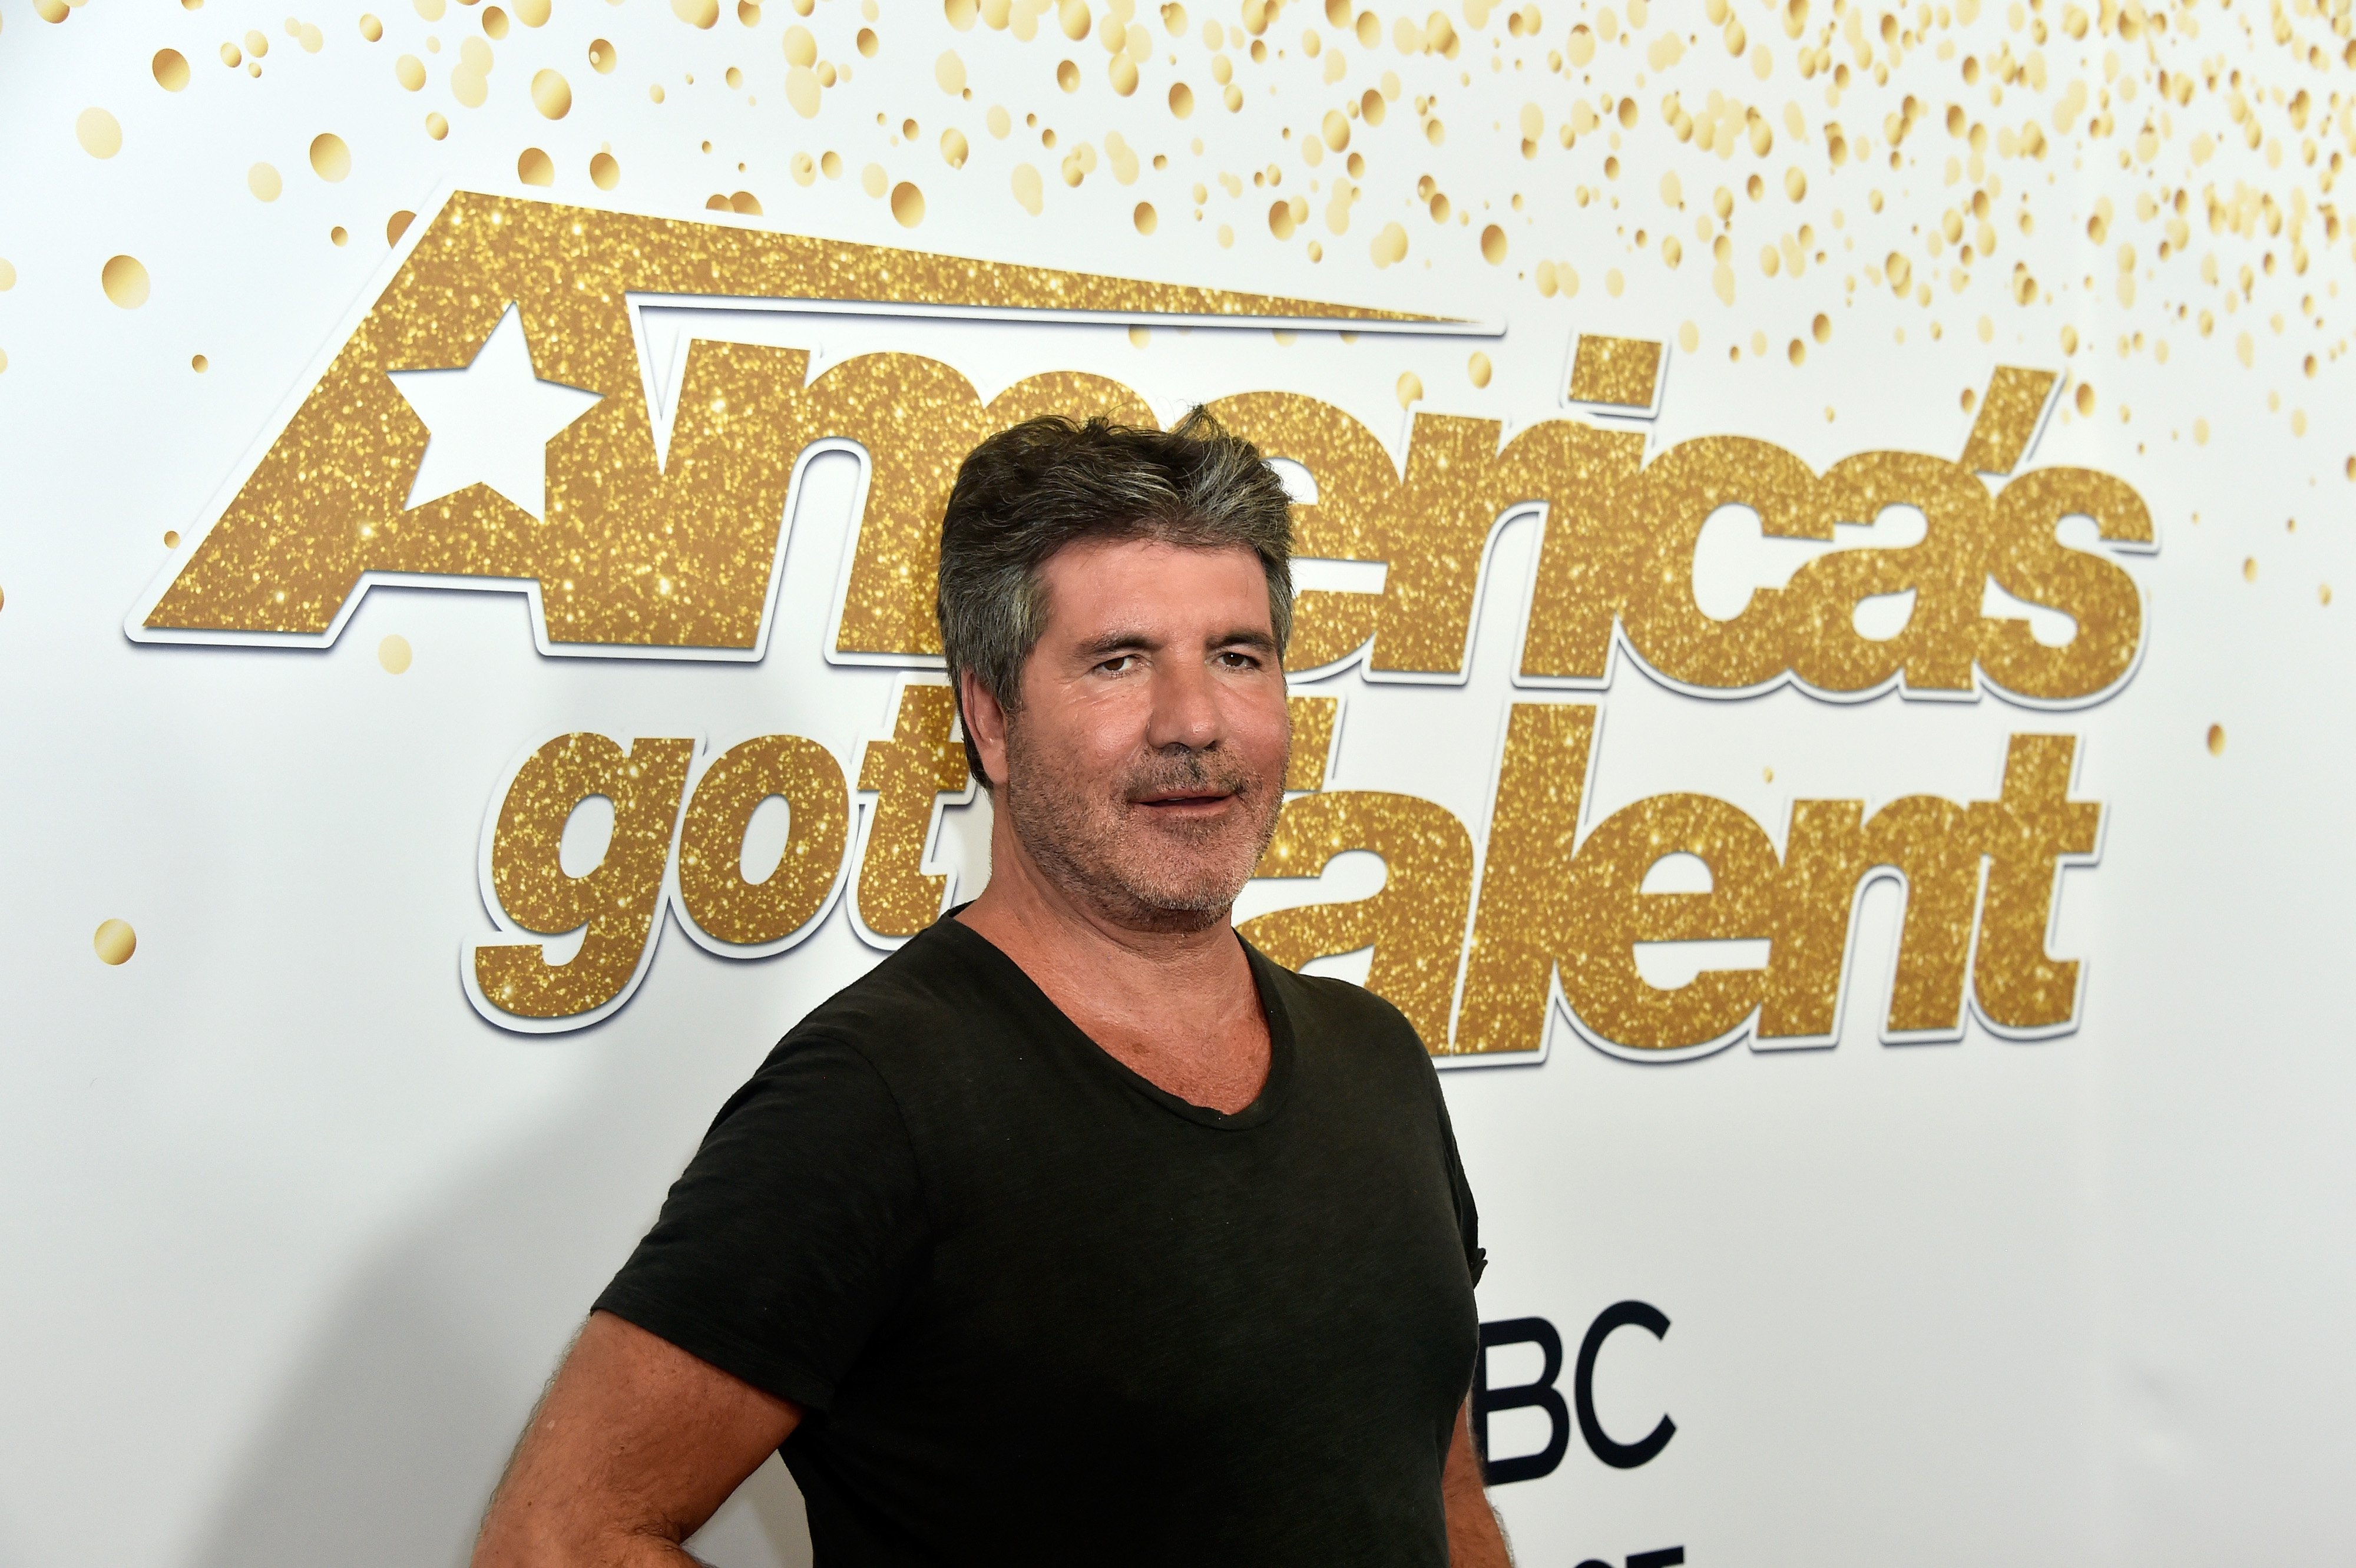 Simon Cowell attends the "America's Got Talent" Season 13 Live Show at Dolby Theatre on August 14, 2018 | Photo: Getty Images